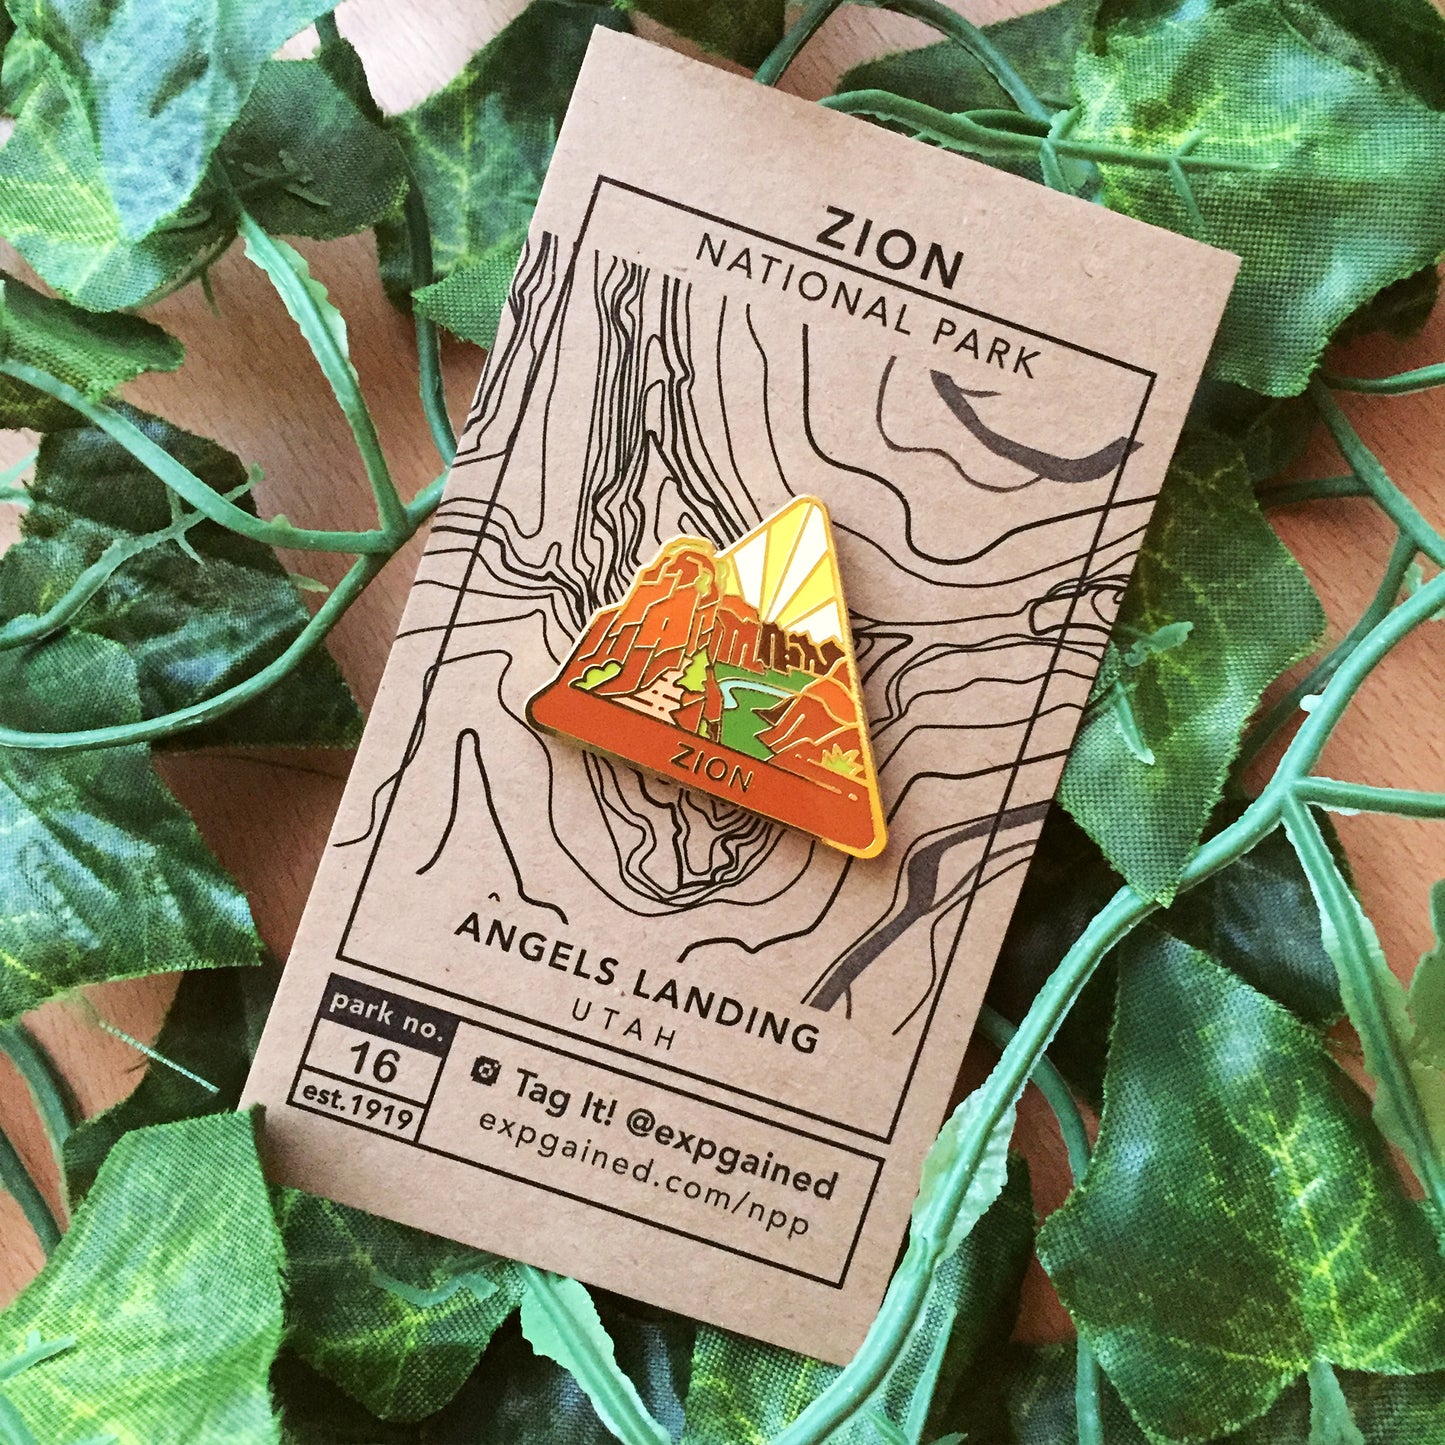 Triangle Zion national park enamel pin featuring a view from the beehive hike on a brown business card size backing card with a topo map of Angels Landing.